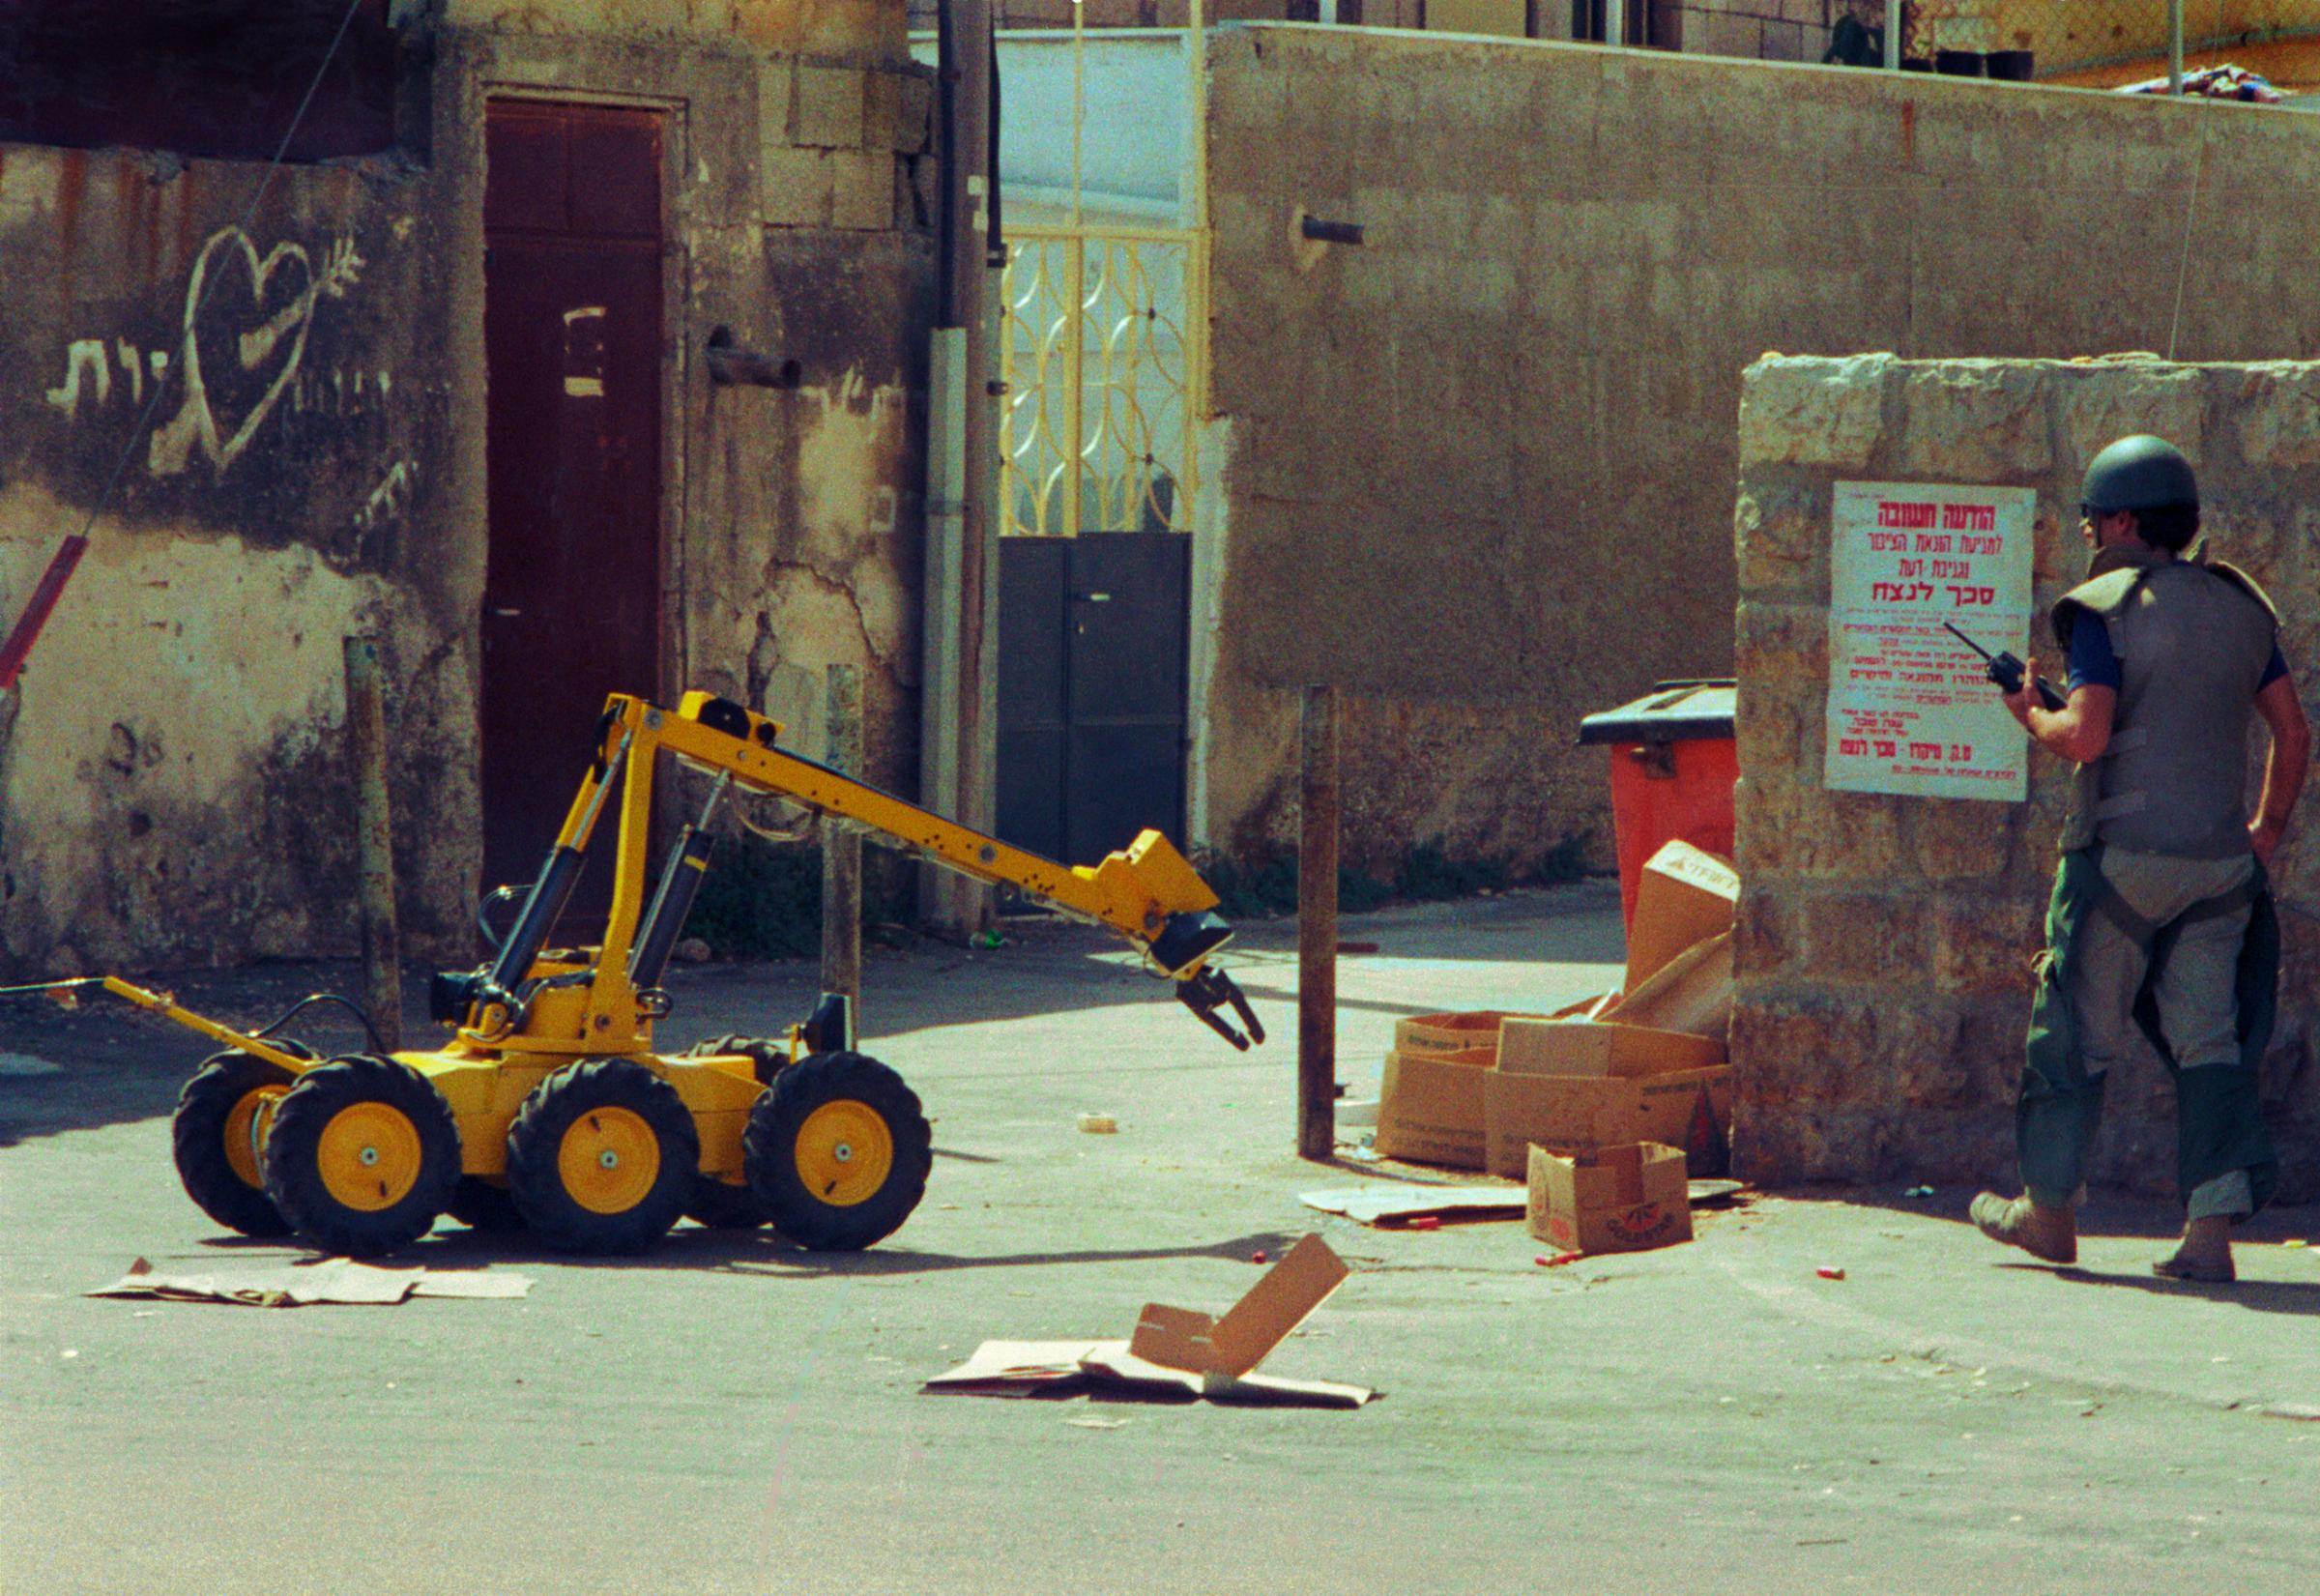 Uri watches as a shotgun-toting robot is aimed, with the aid of a remote video camera, at a possible bomb near the trash can in a Jerusalem side street.